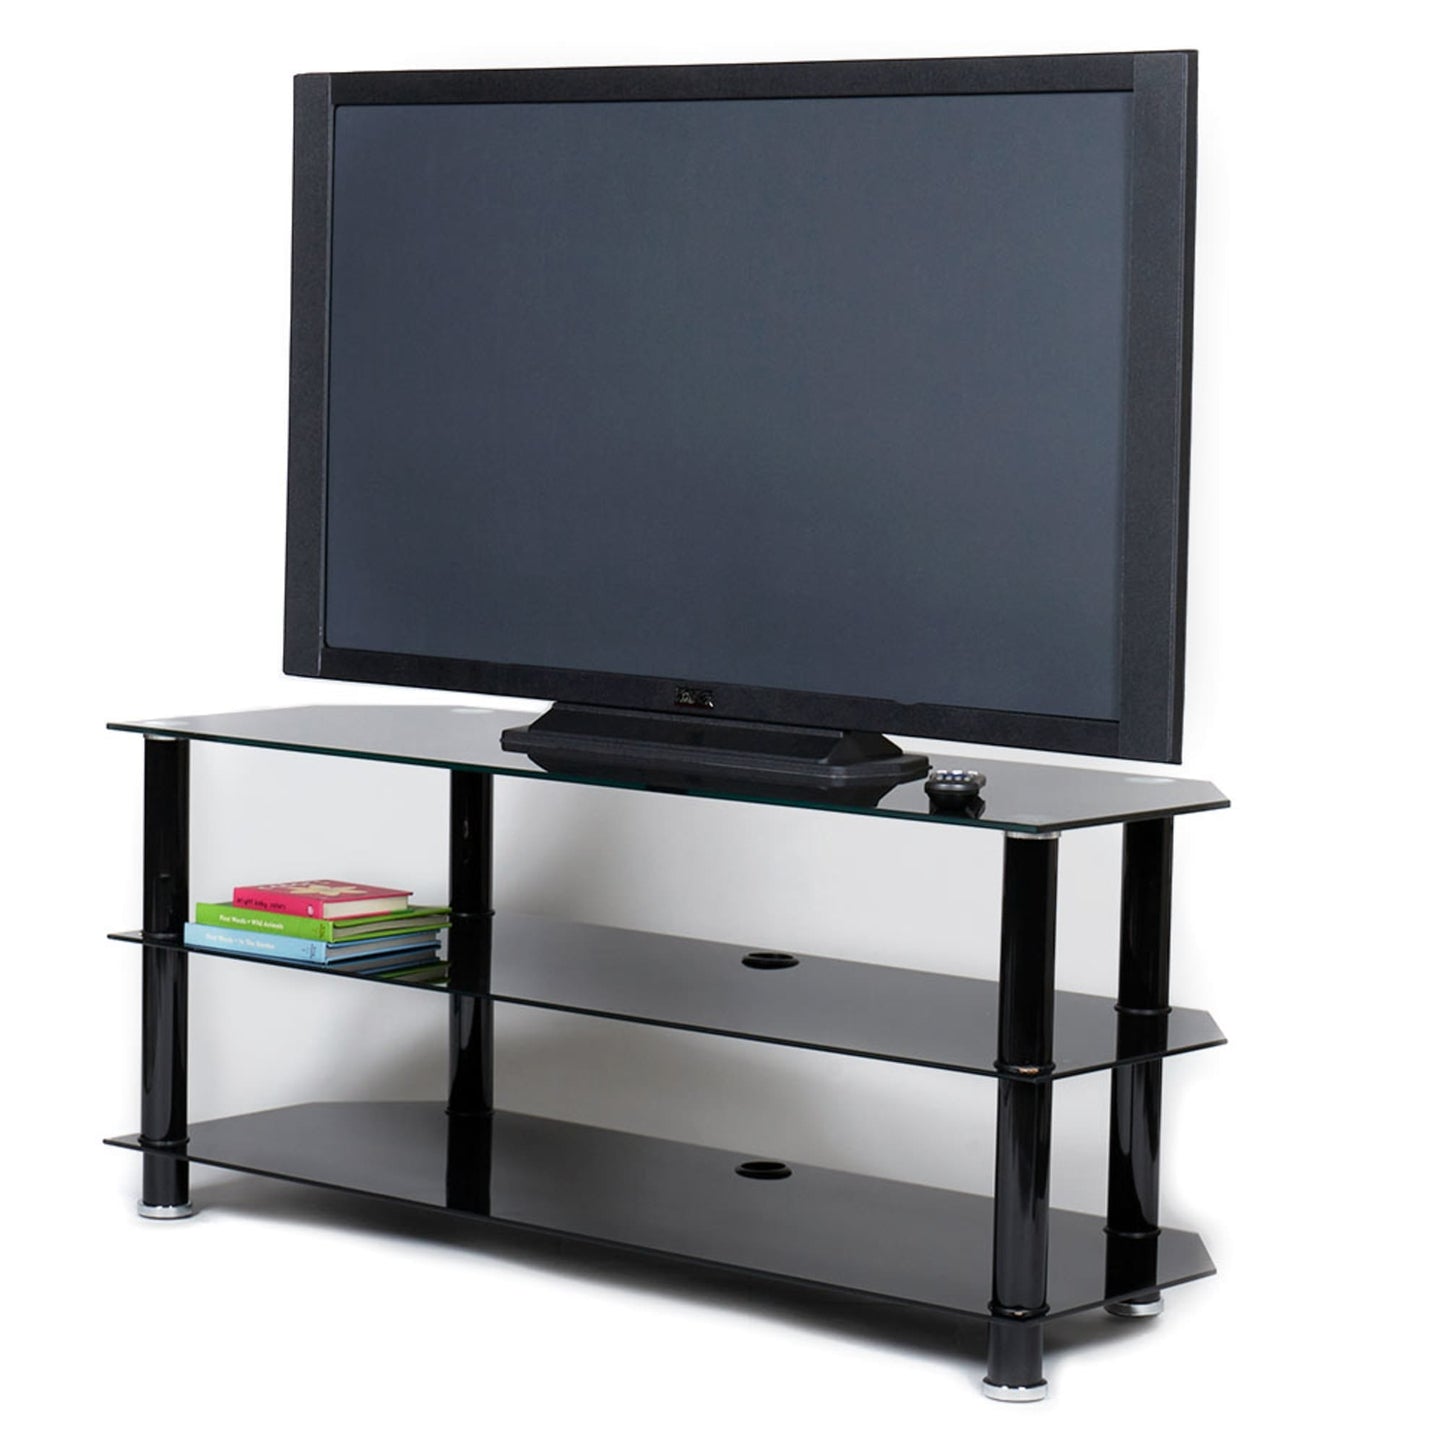 47.2” Brown Tempered Glass Corner TV Stand with Open Shelves